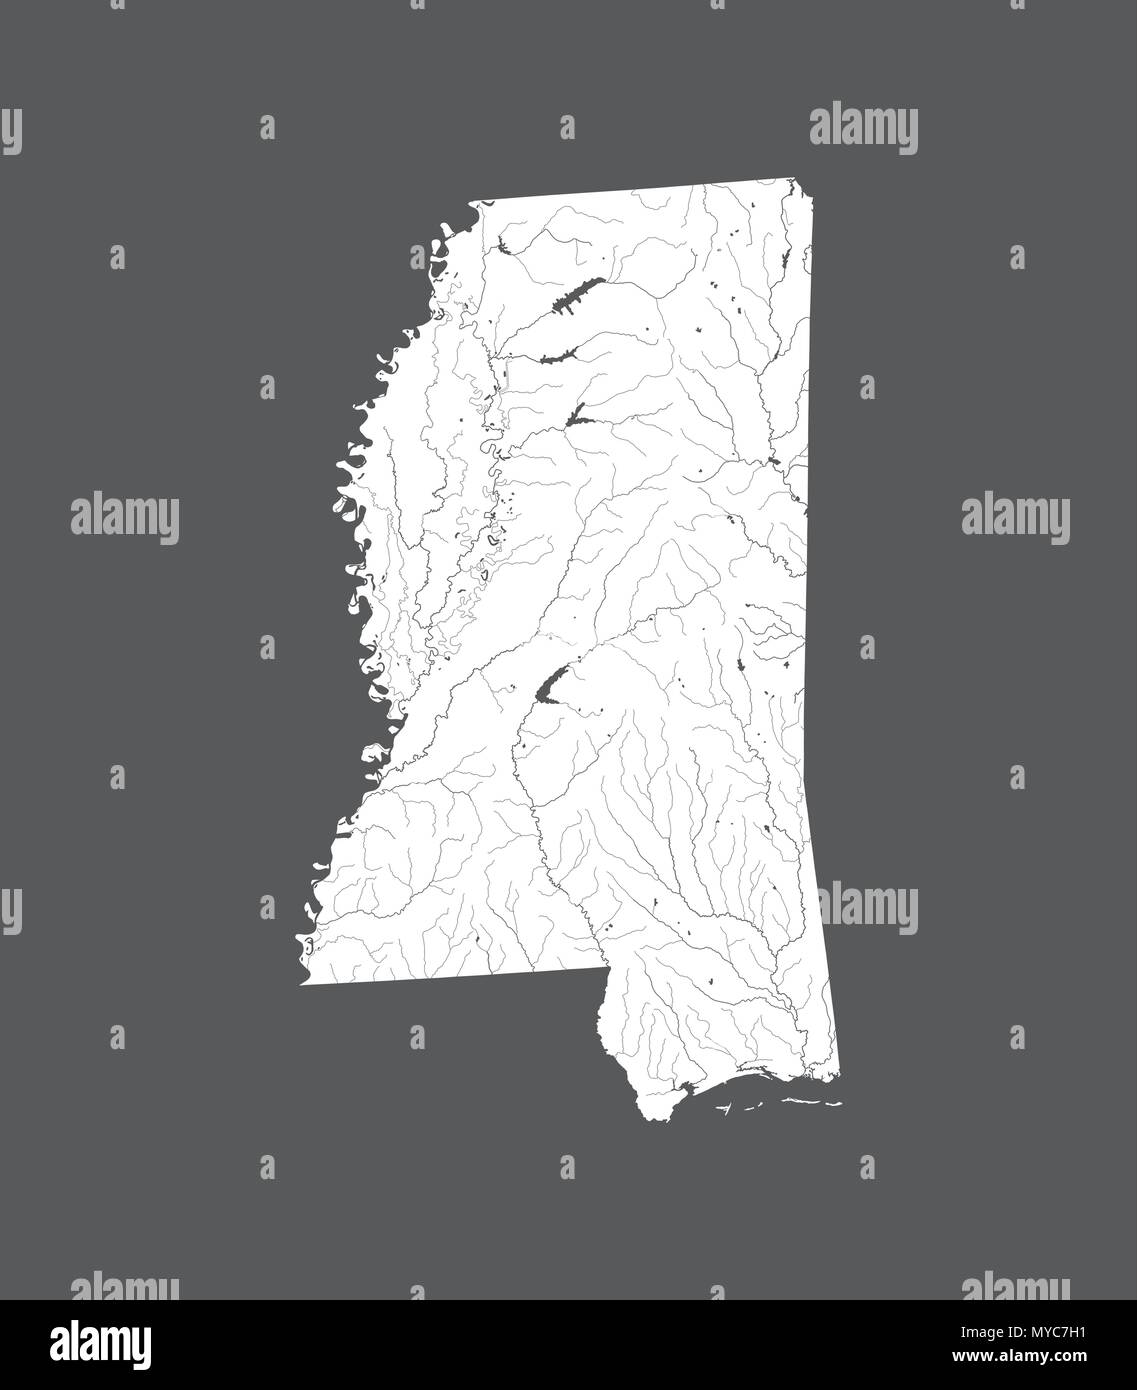 U.S. states - map of Mississippi. Hand made. Rivers and lakes are shown. Please look at my other images of cartographic series - they are all very det Stock Vector